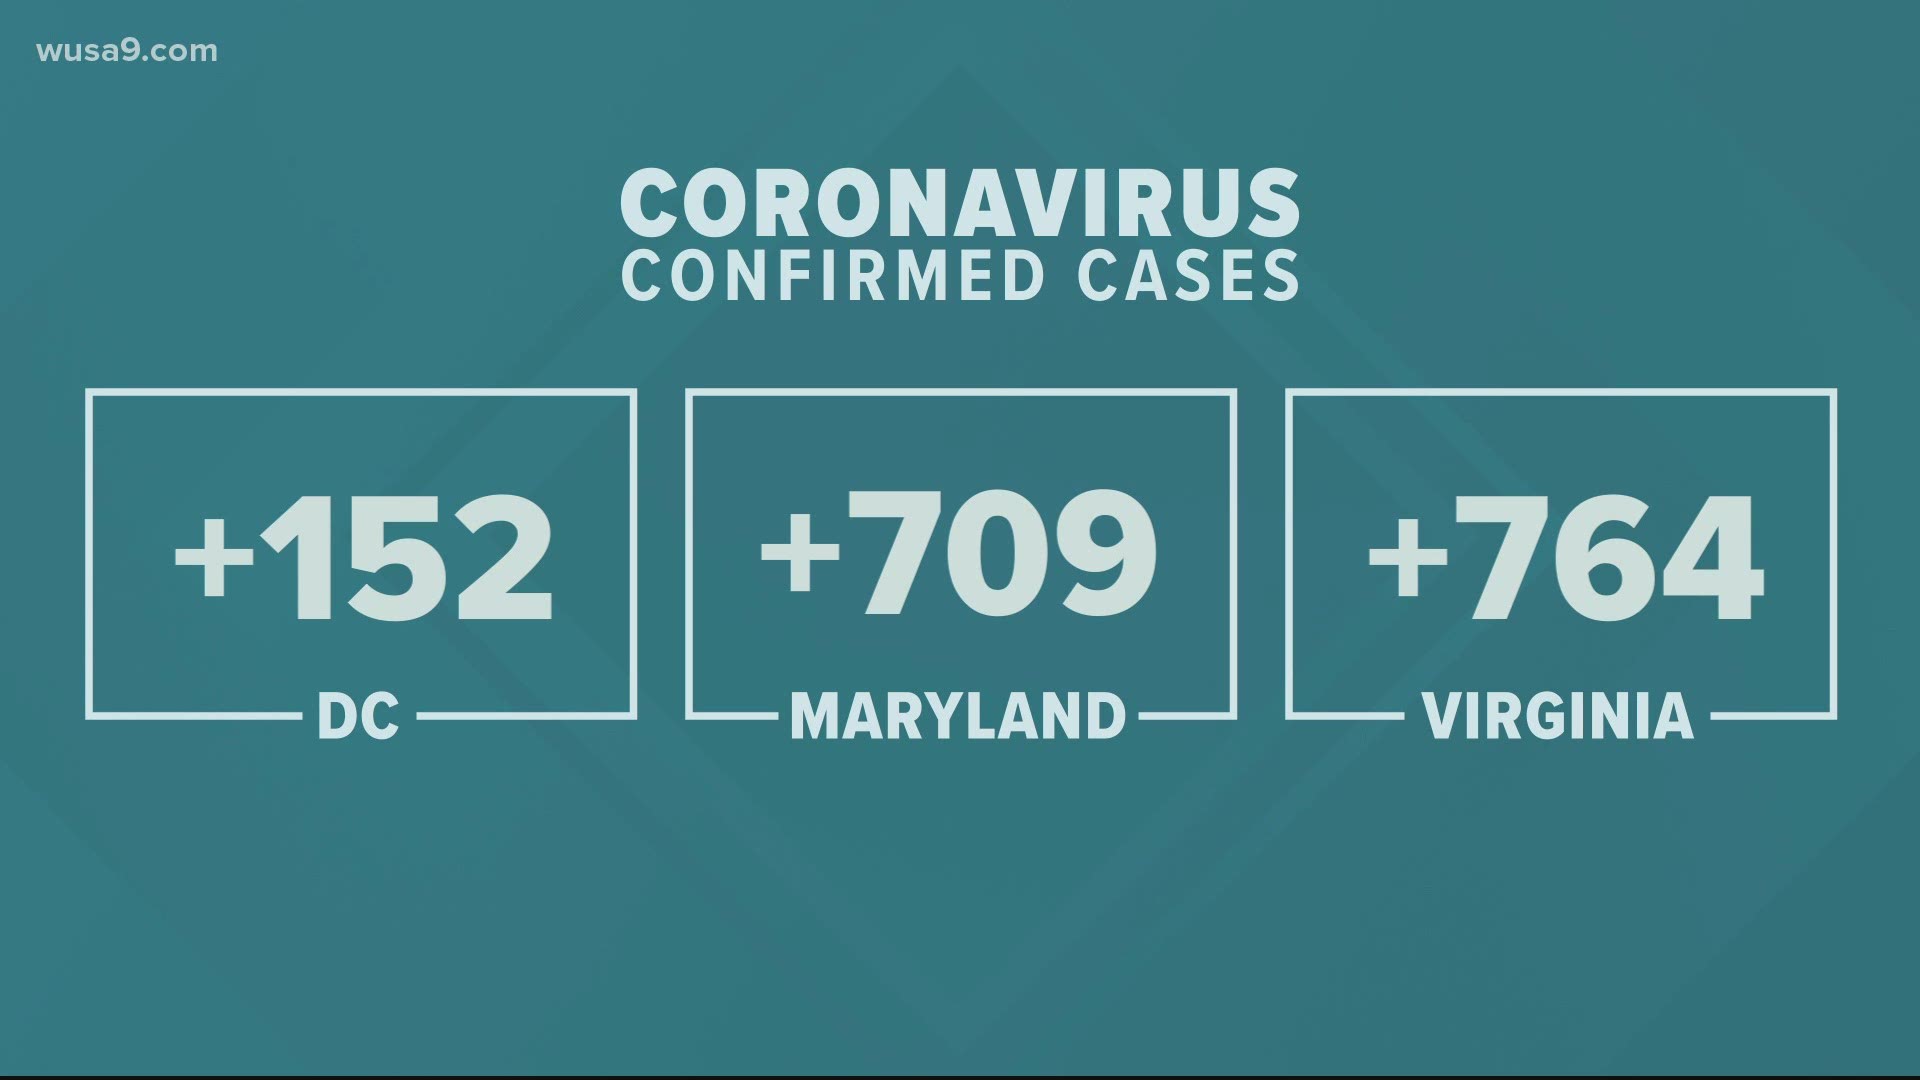 The coronavirus impact on the DMV continues to grow. Here are the latest details.